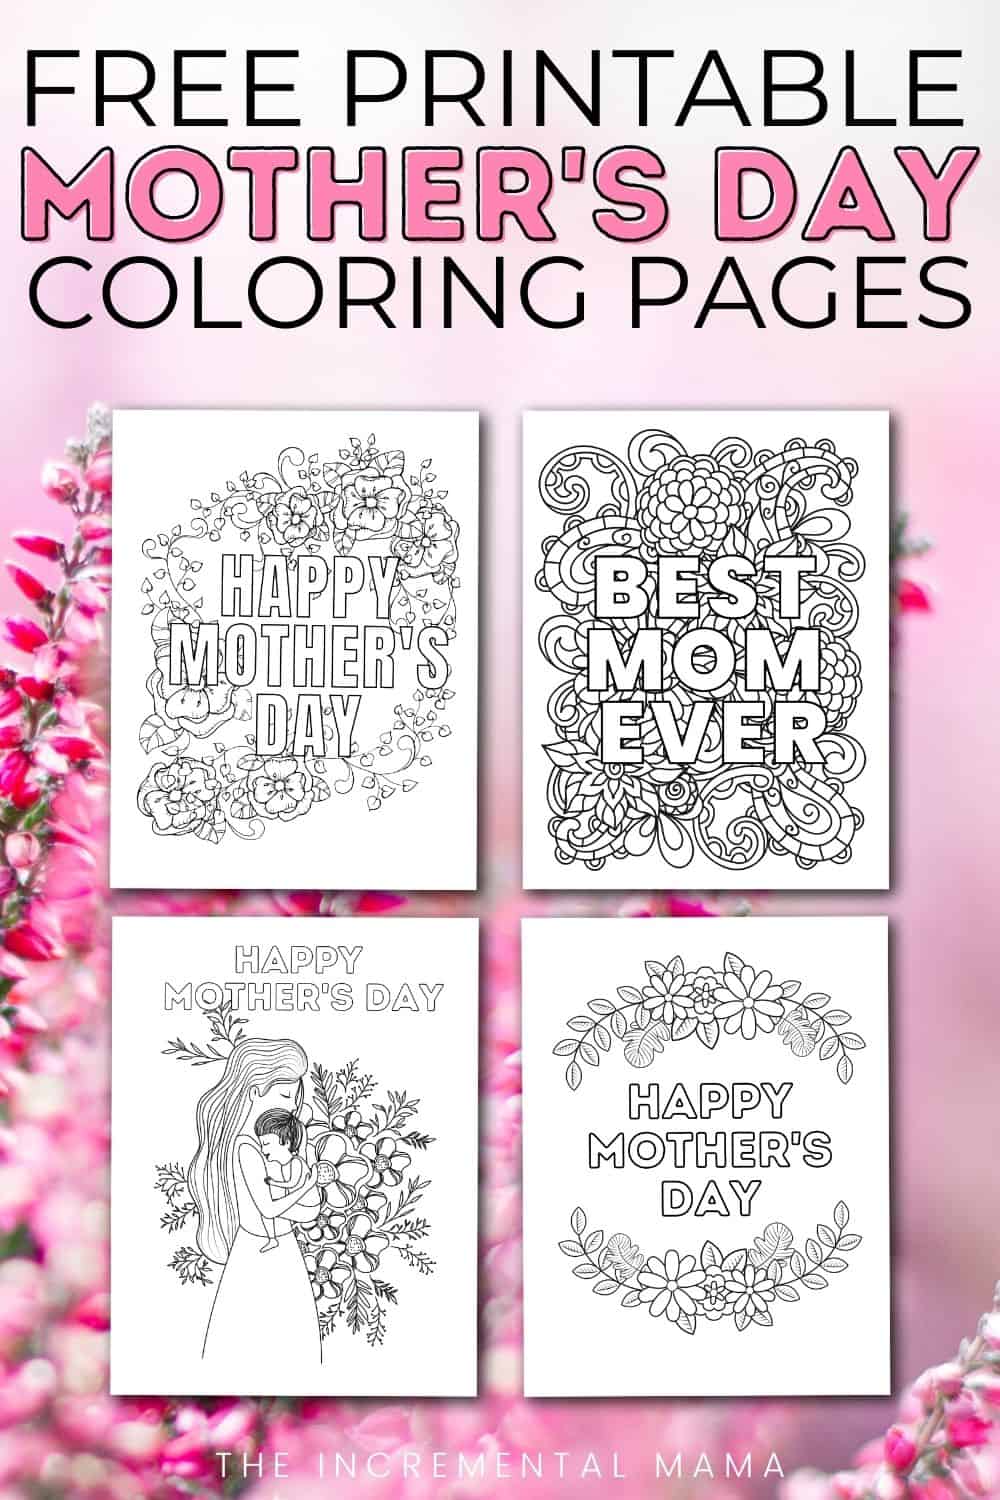 Free Happy Mother's Day Coloring Pages Printable